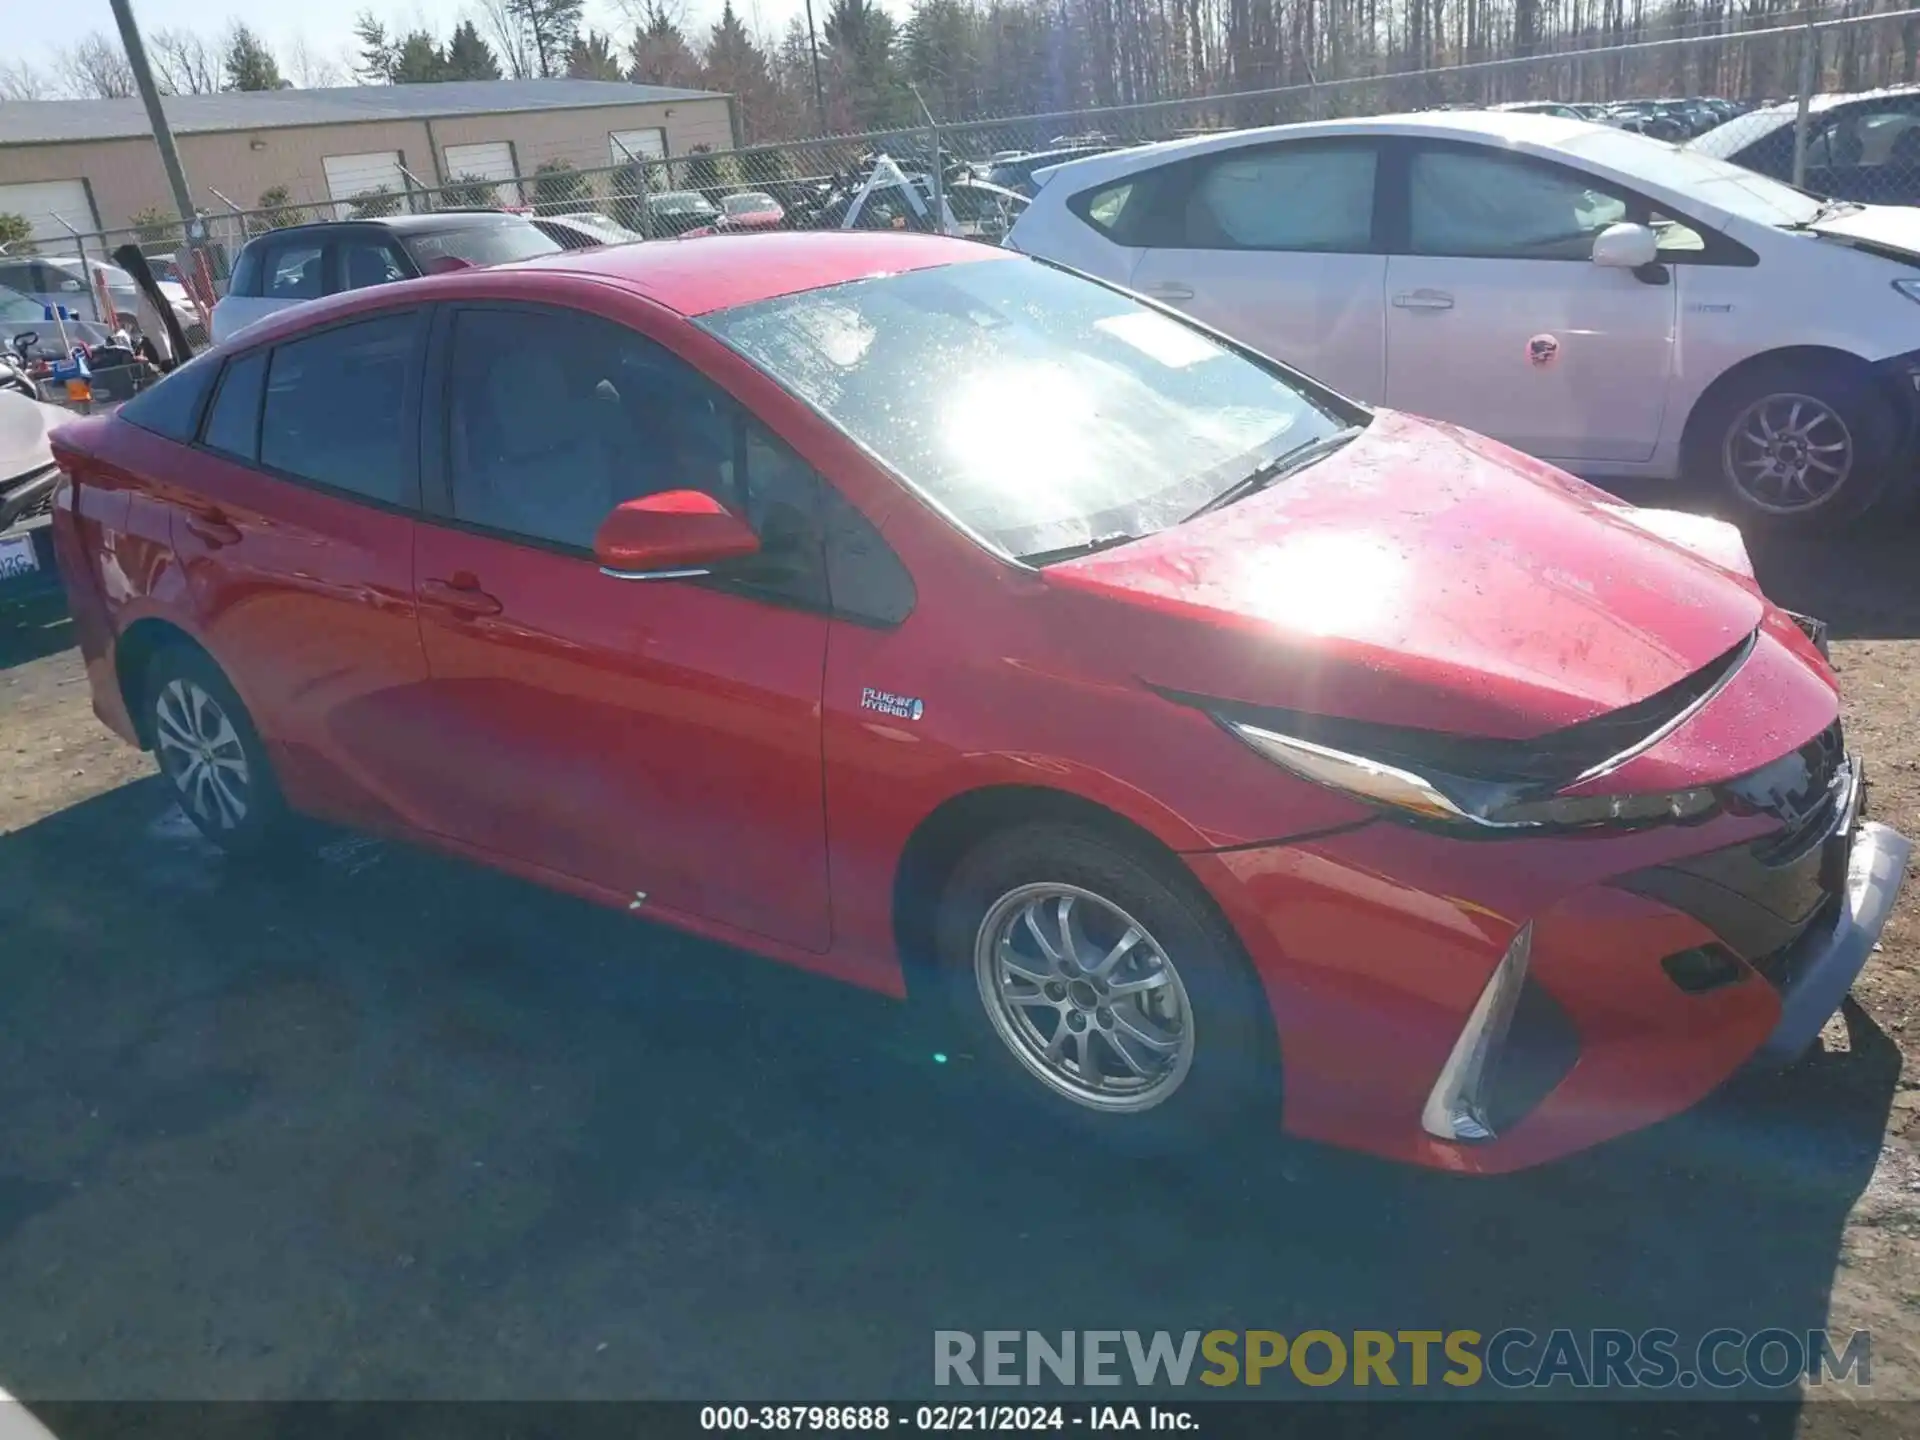 13 Photograph of a damaged car JTDKAMFPXM3173496 TOYOTA PRIUS PRIME 2021